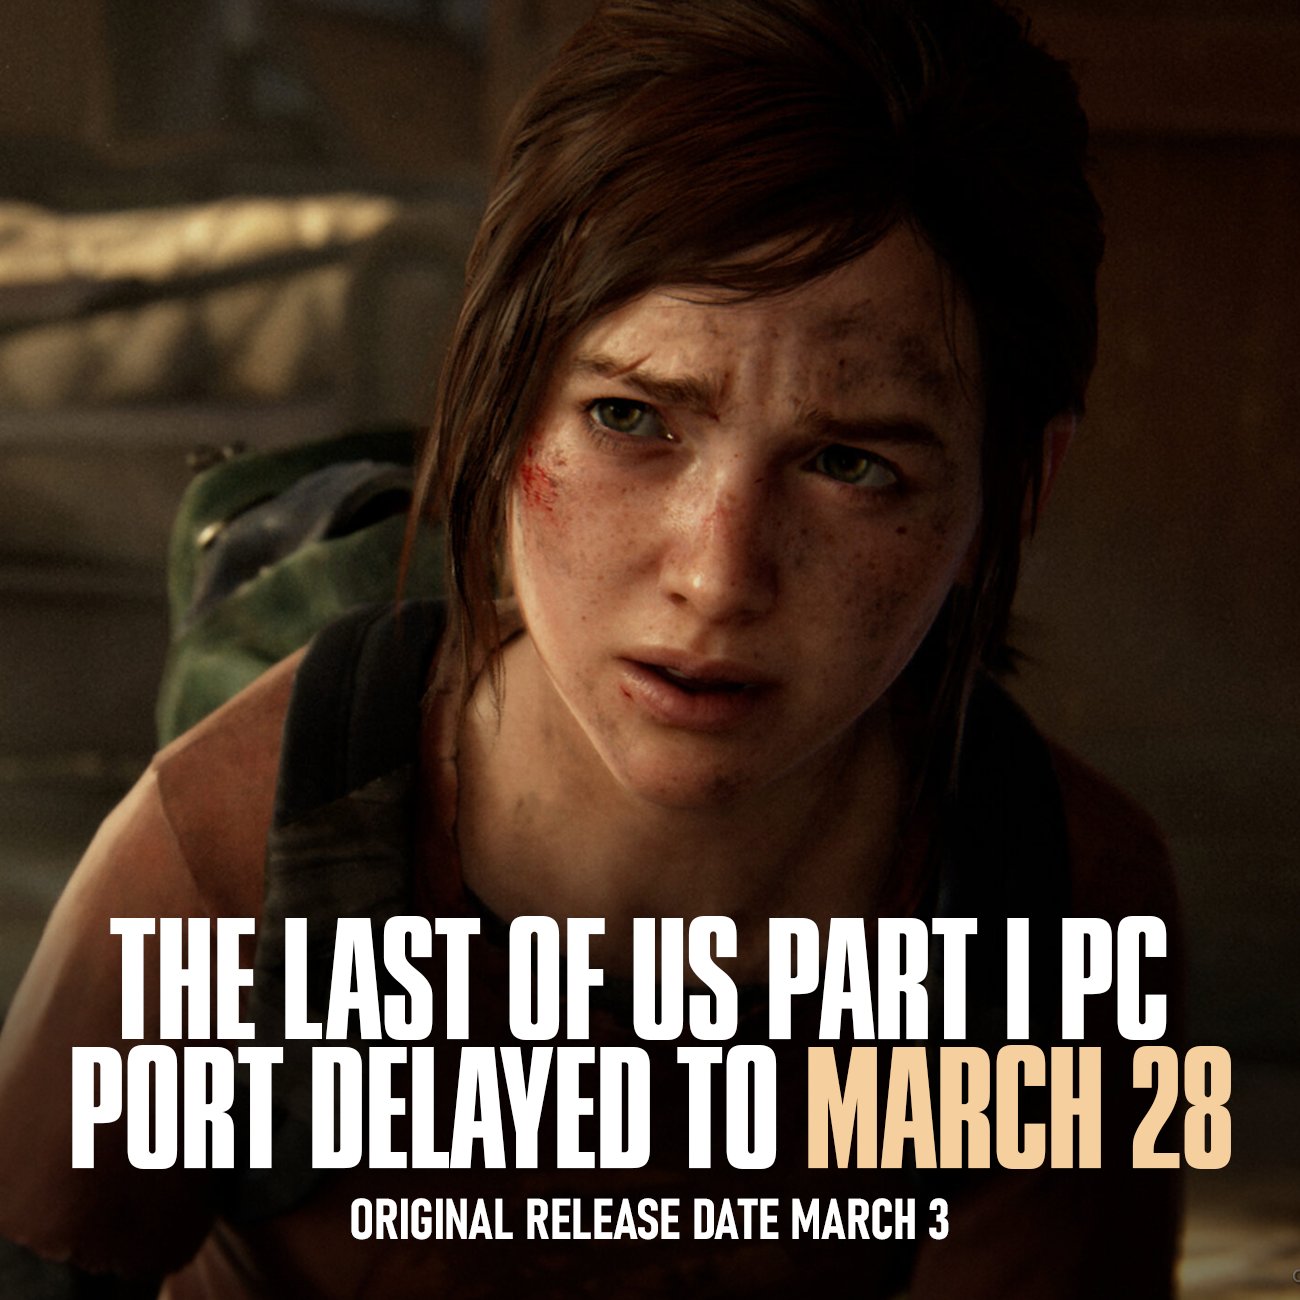 The Last Of Us: Part 1 has been delayed by a few weeks on PC